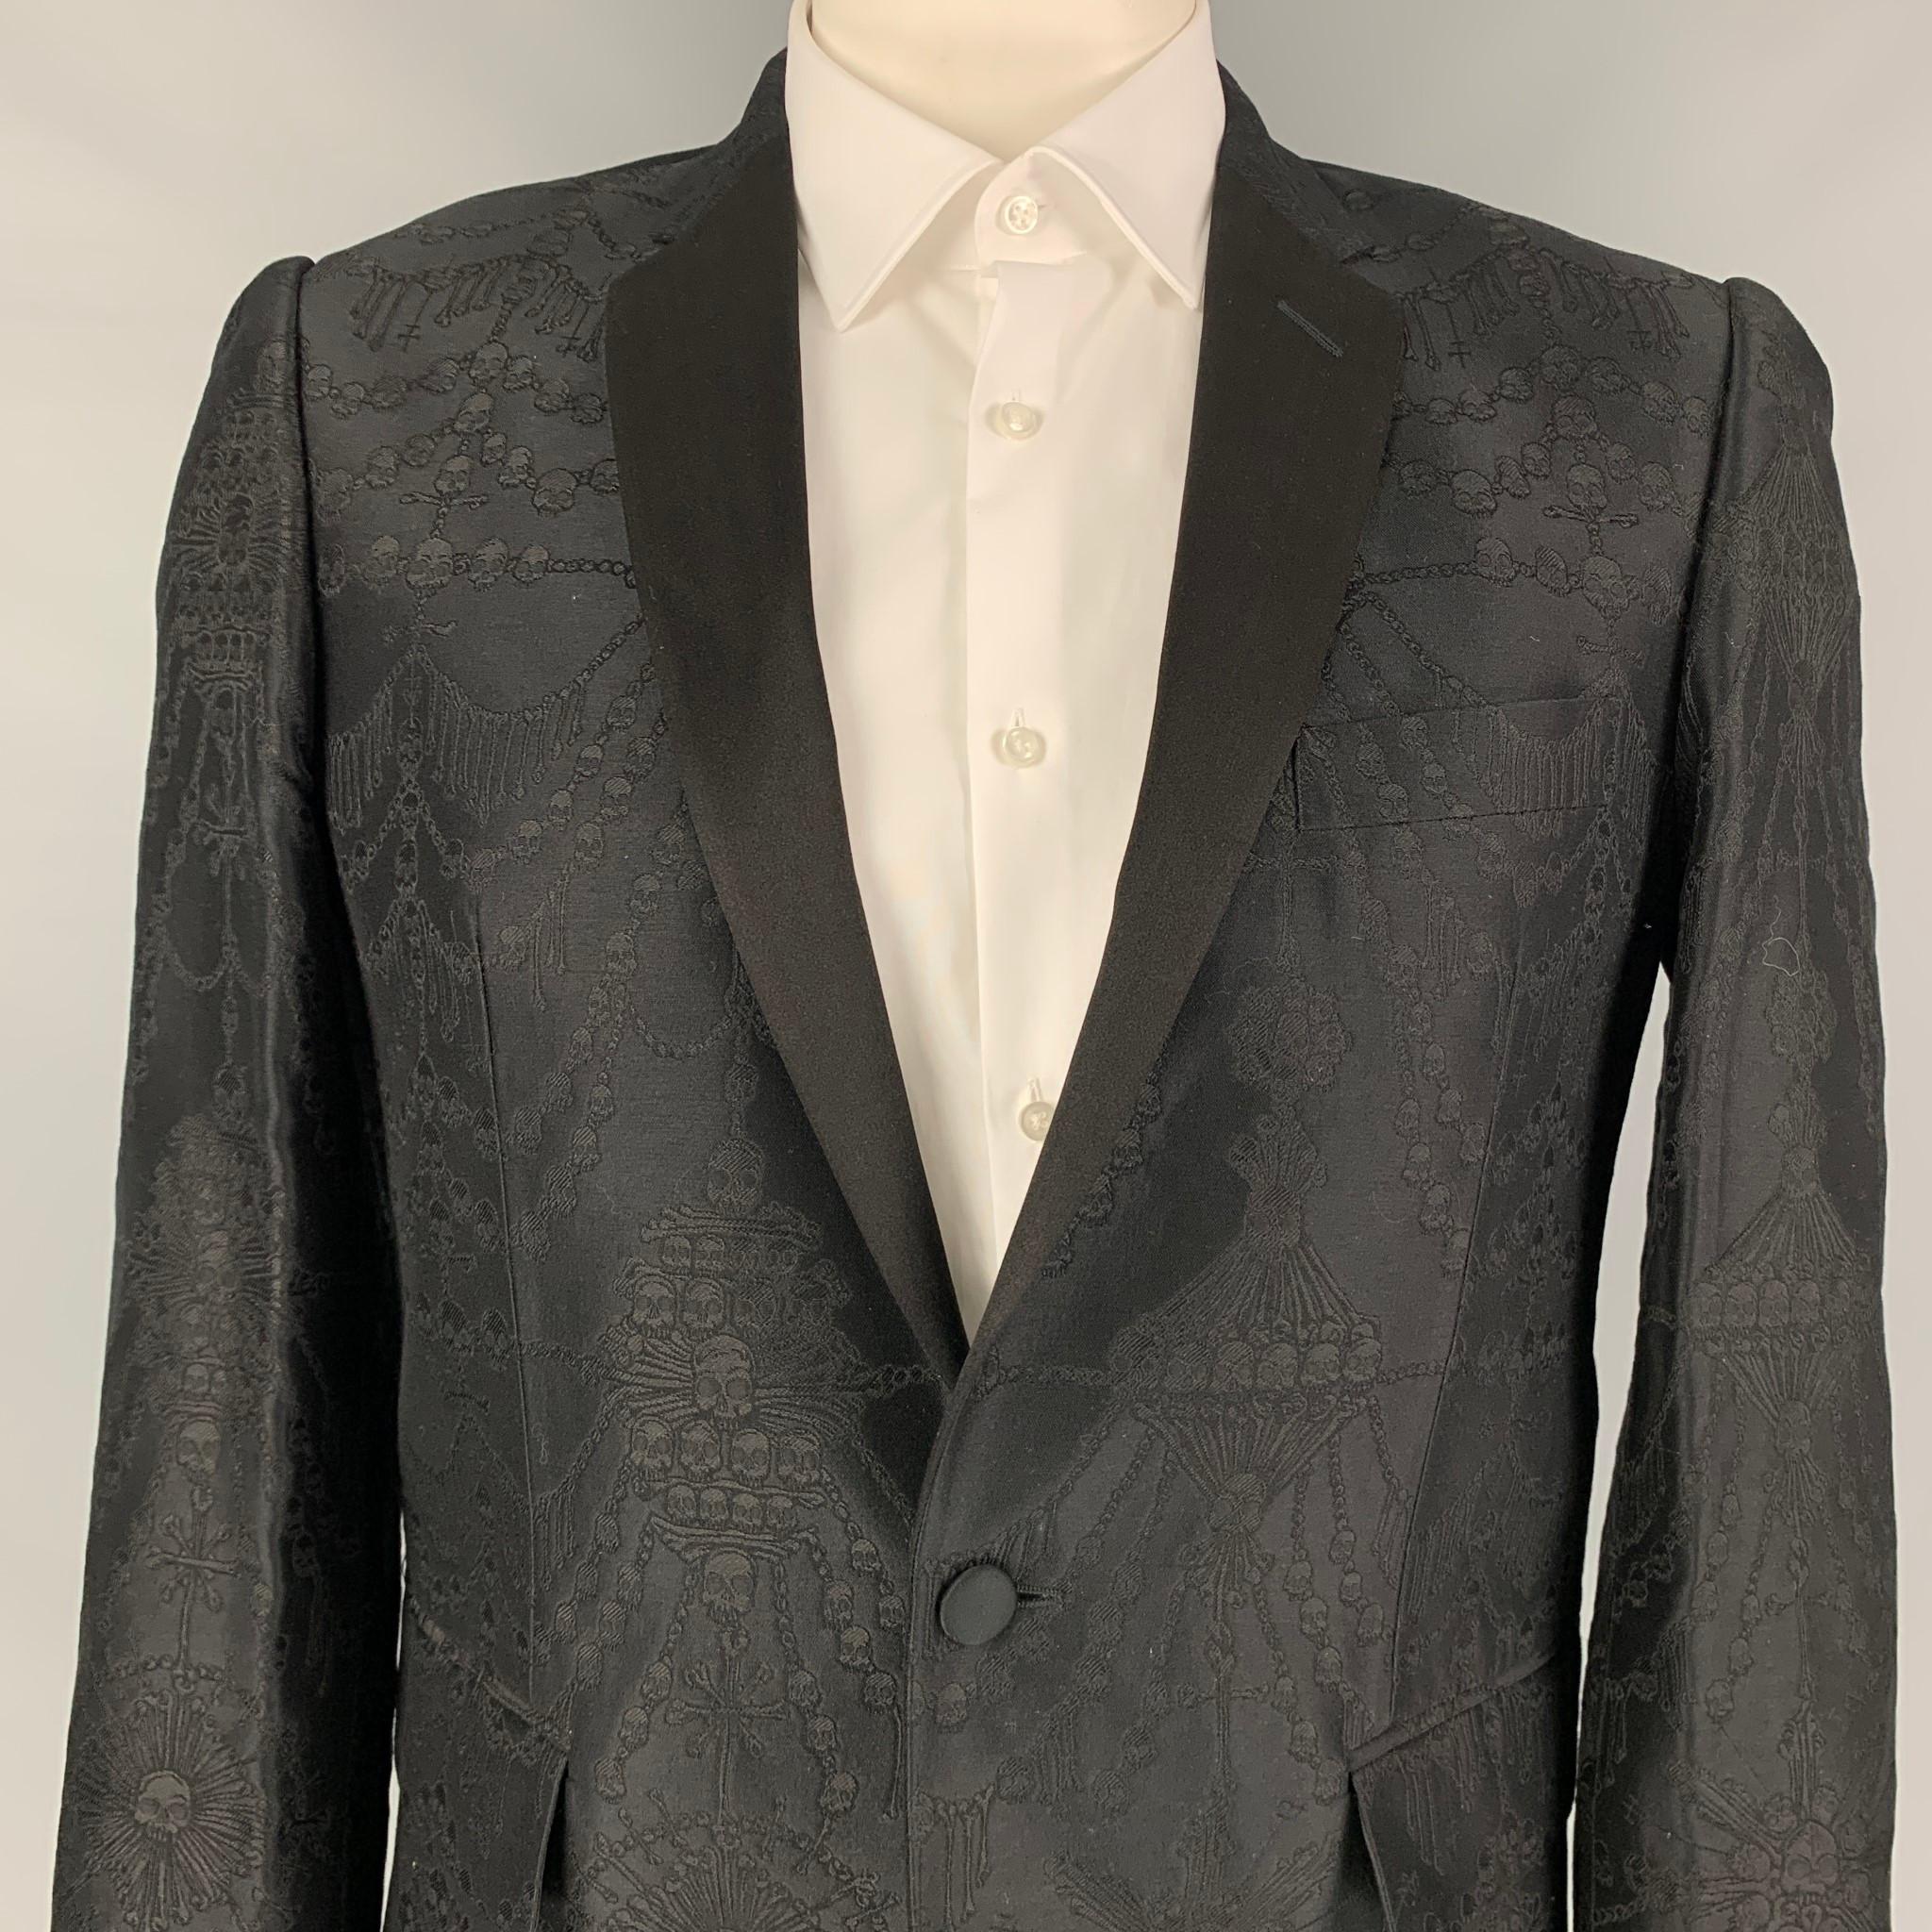 JOHN RICHMOND sport coat comes in a black skull jacquard cotton blend with a full liner featuring a notch lapel, flap pockets, single back vent, and a single button closure. Made in Italy. 

Excellent Pre-Owned Condition.
Marked: